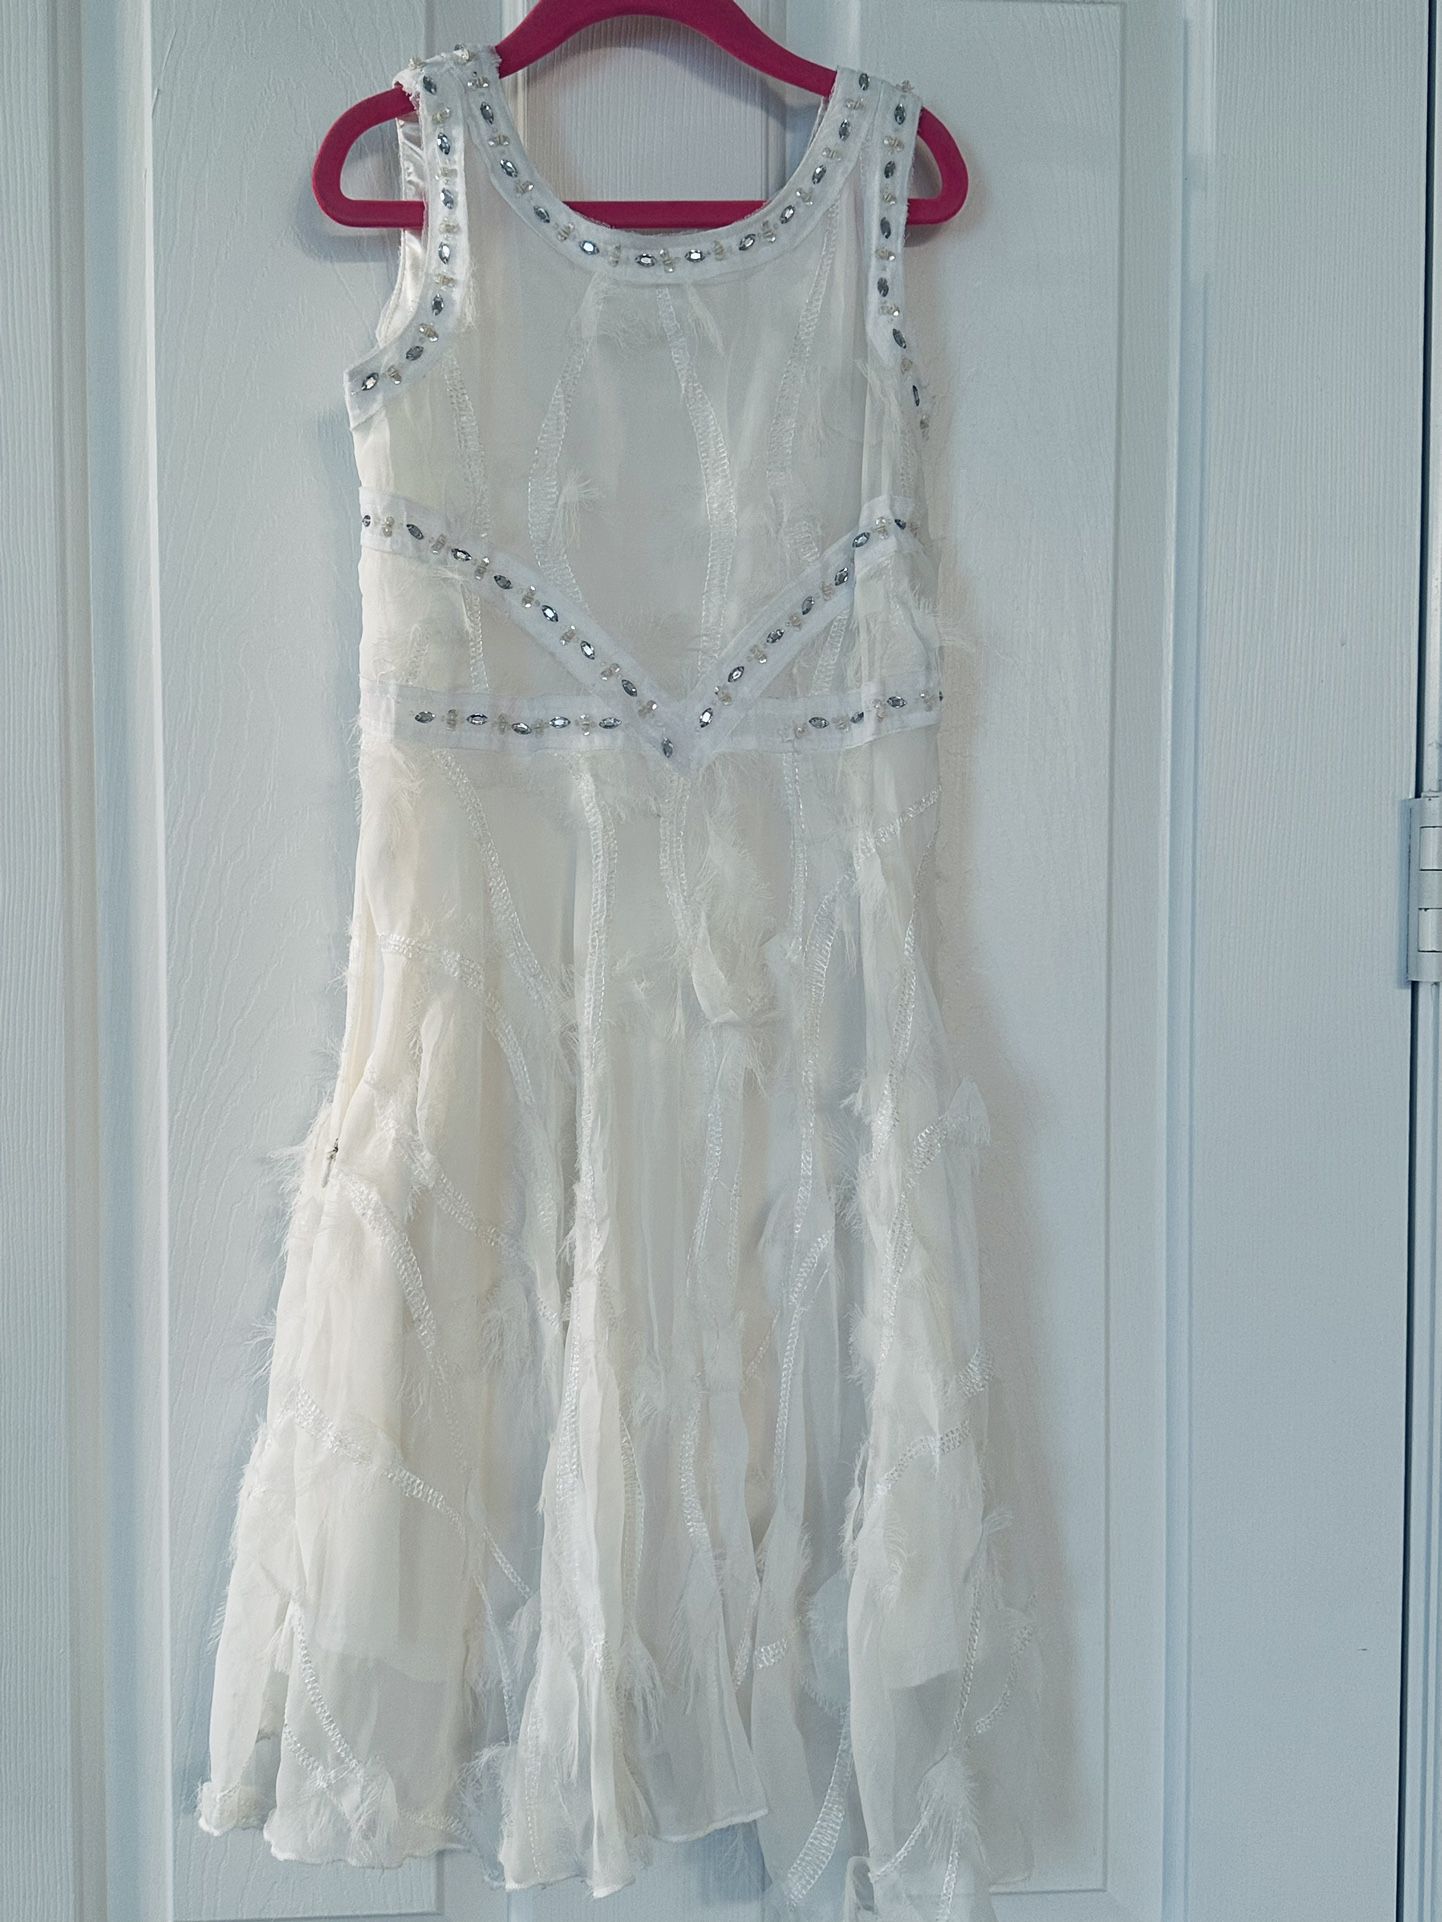 Flower Girl Dress Off White, Light Weight Size 7/8 Years